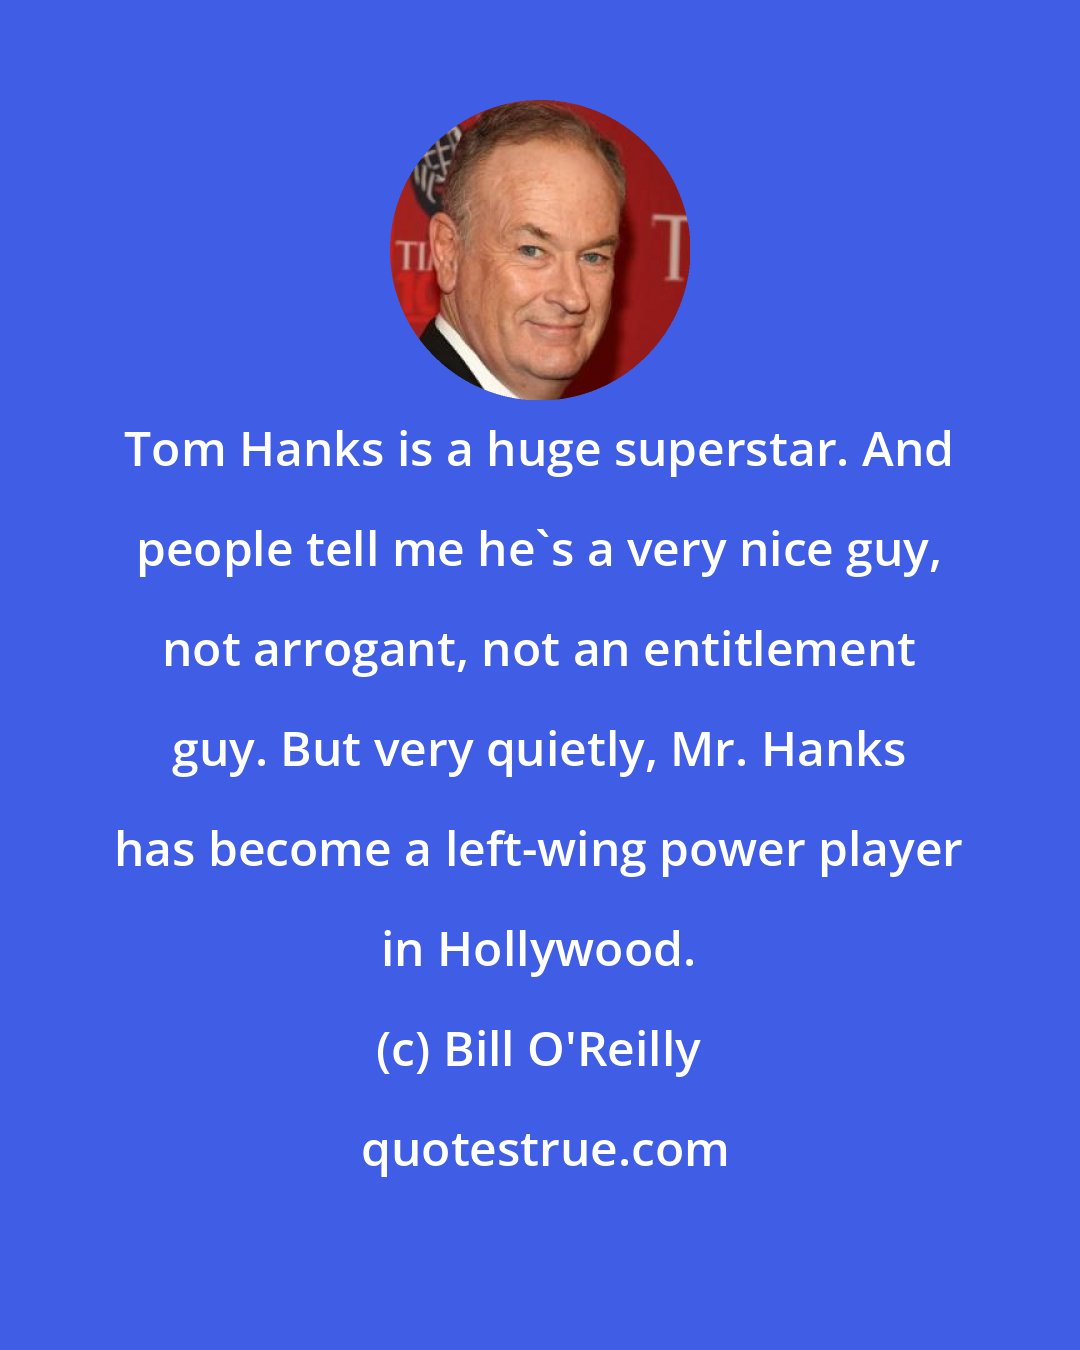 Bill O'Reilly: Tom Hanks is a huge superstar. And people tell me he's a very nice guy, not arrogant, not an entitlement guy. But very quietly, Mr. Hanks has become a left-wing power player in Hollywood.